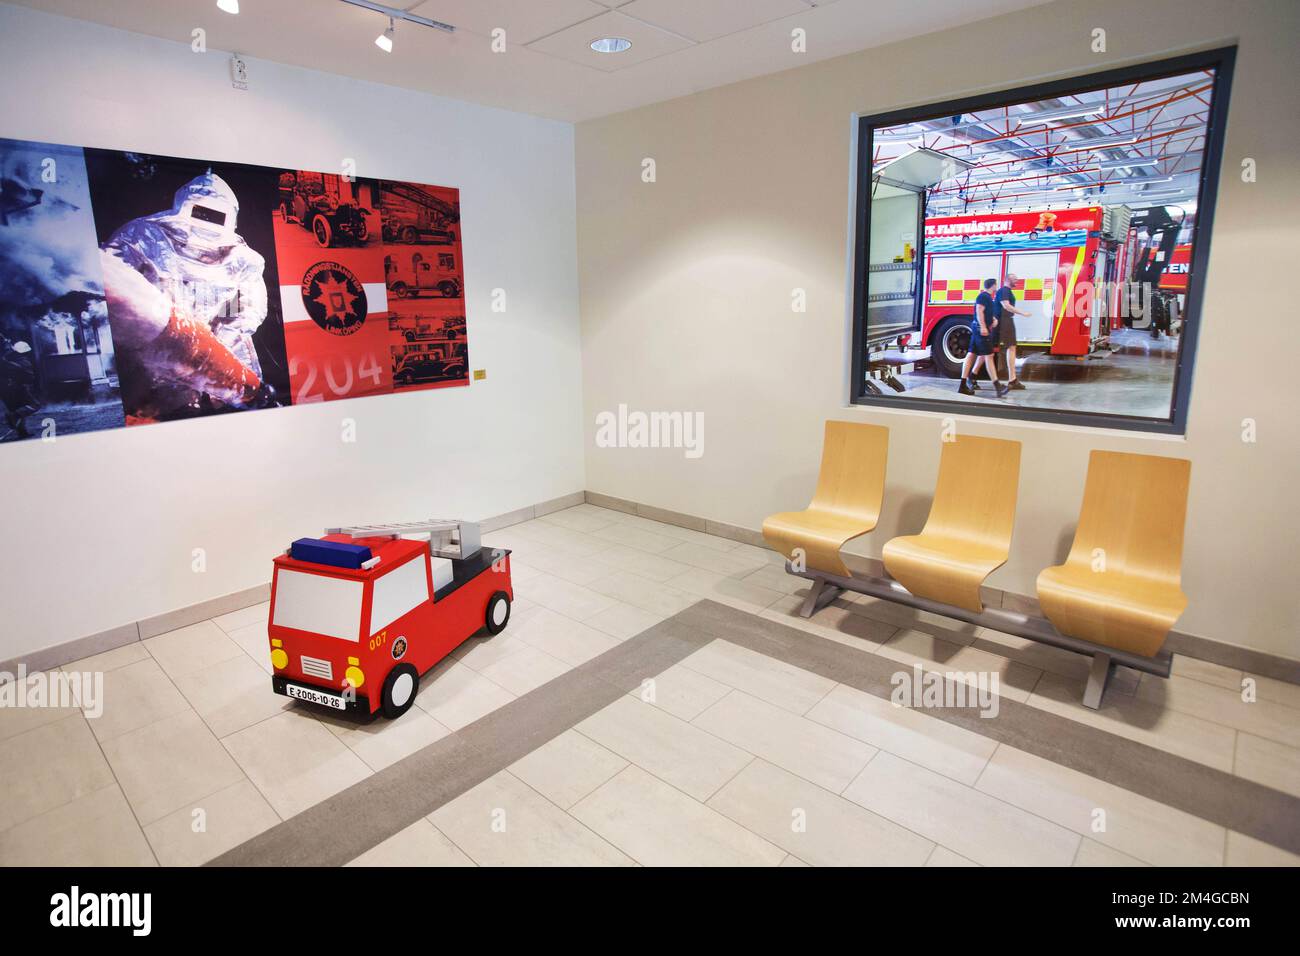 A fire station. Stock Photo